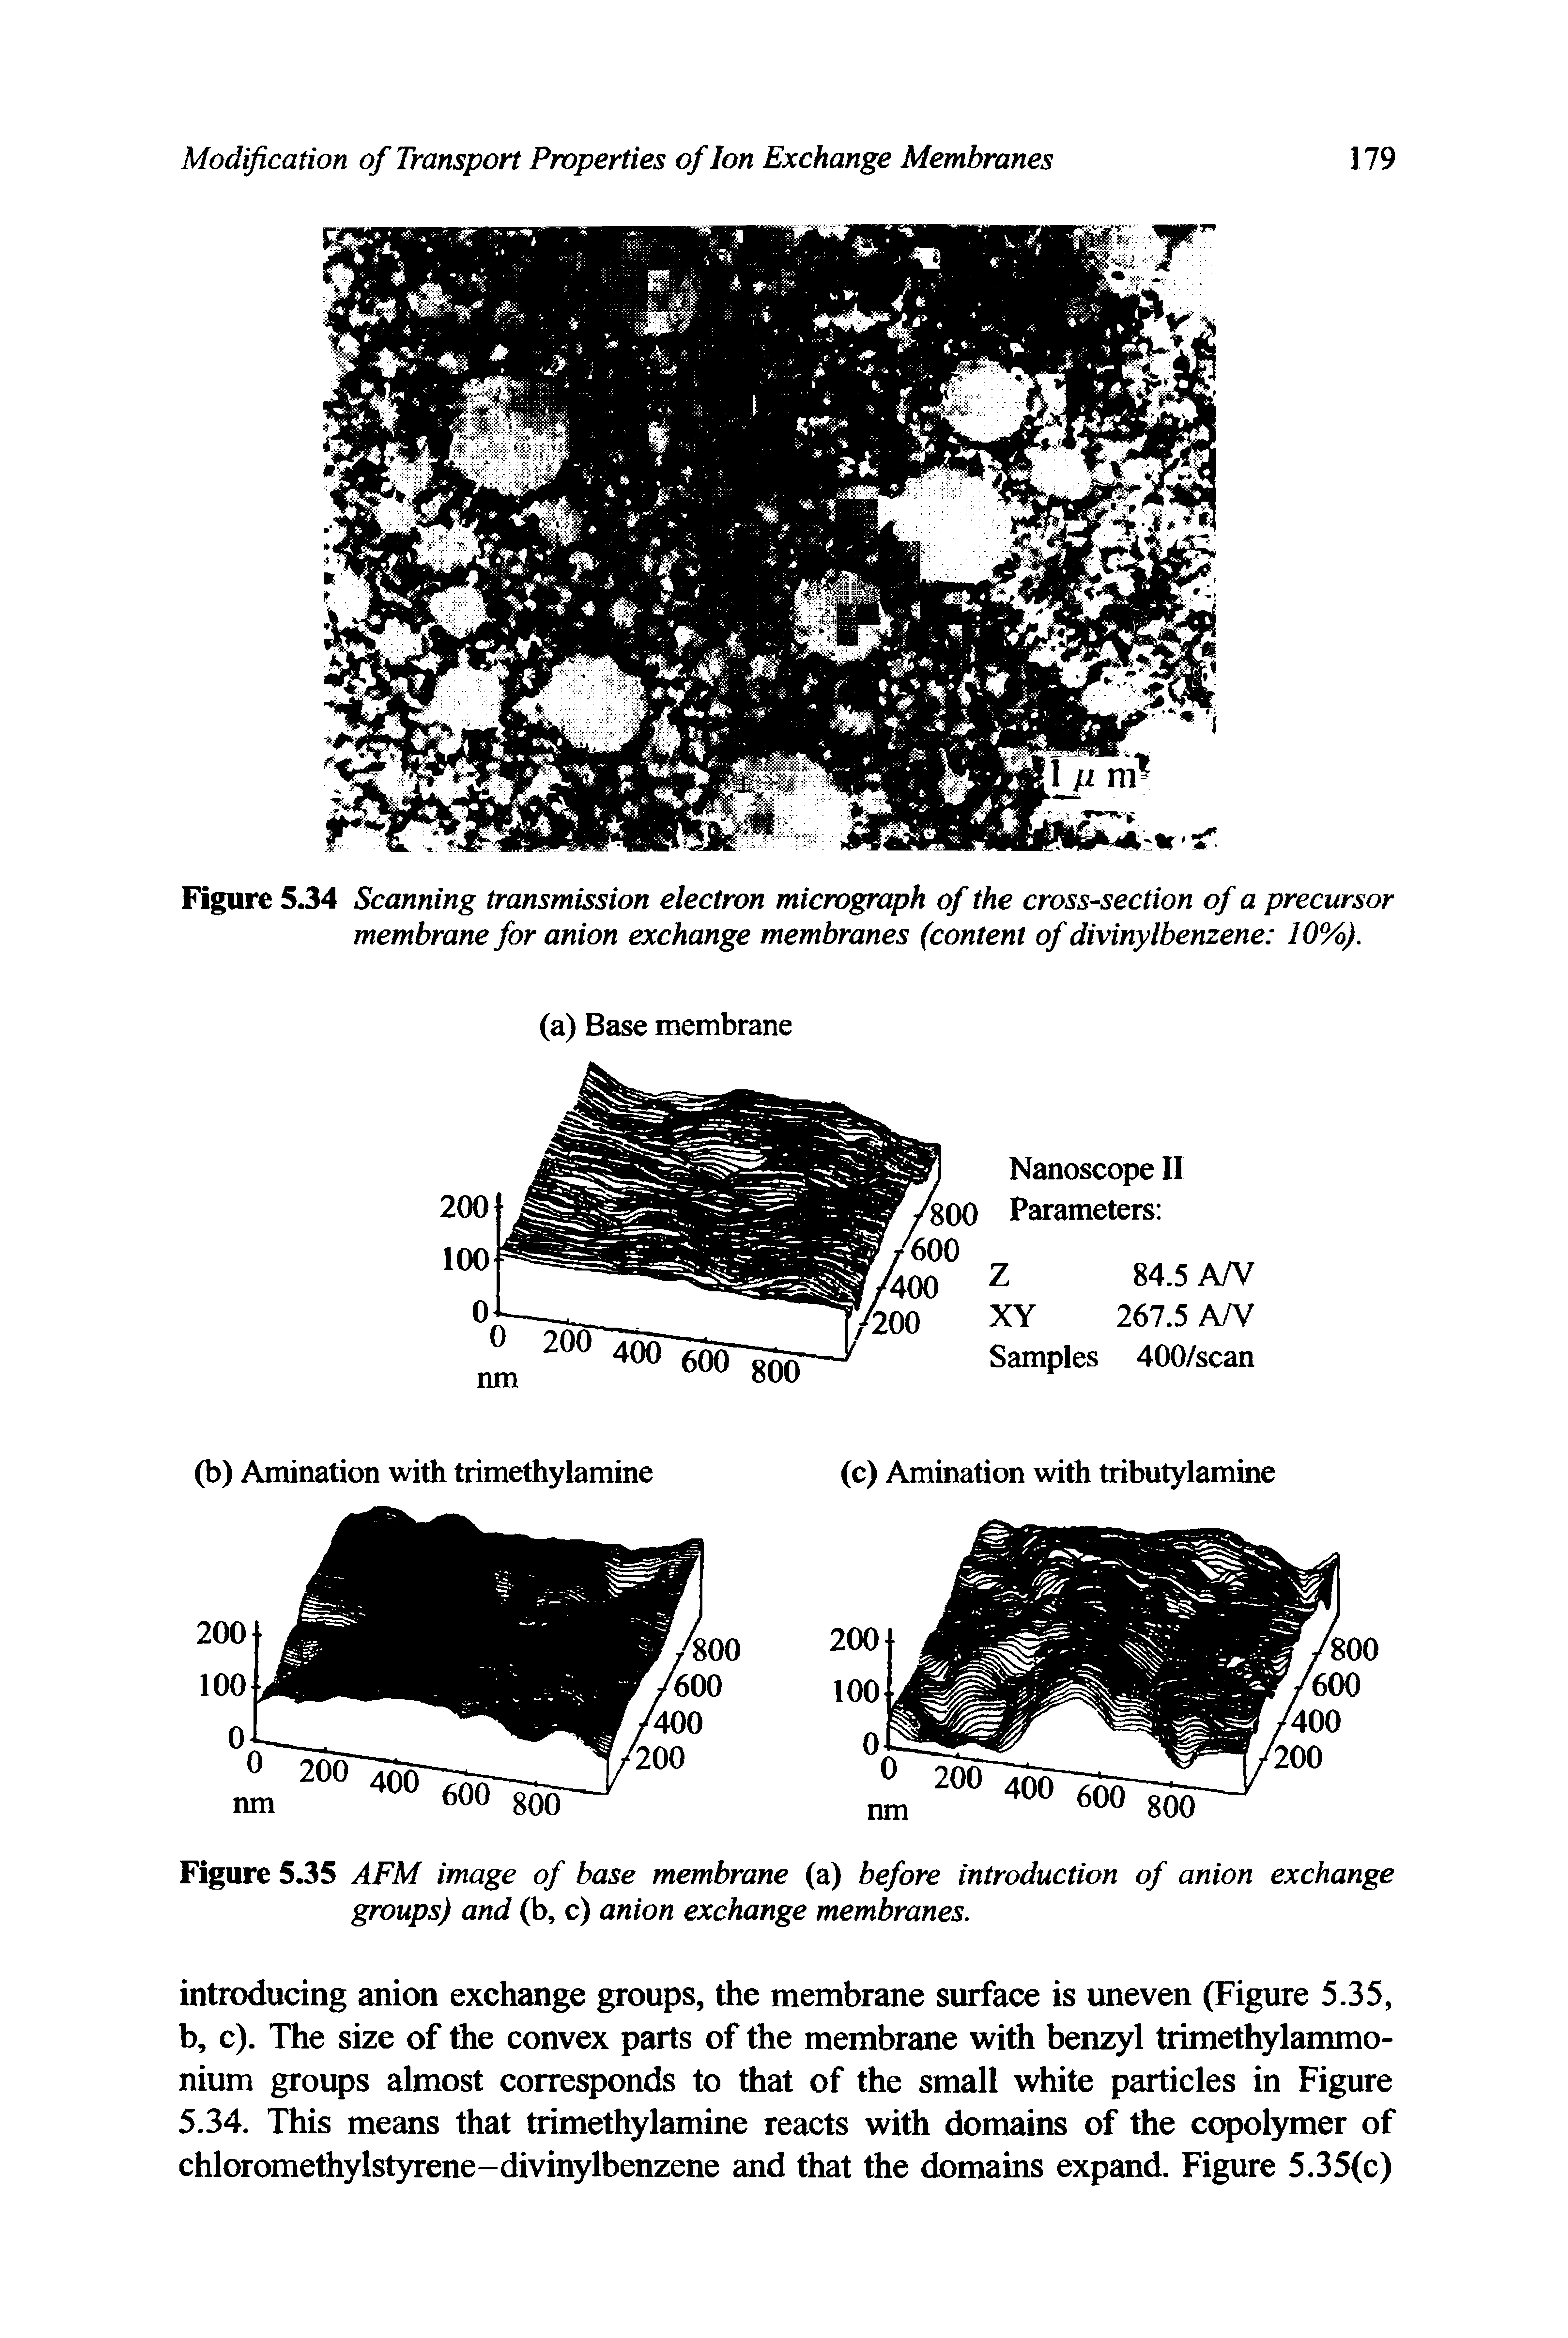 Figure 5.34 Scanning transmission electron micrograph of the cross-section of a precursor membrane for anion exchange membranes (content of divinylbenzene 10%).